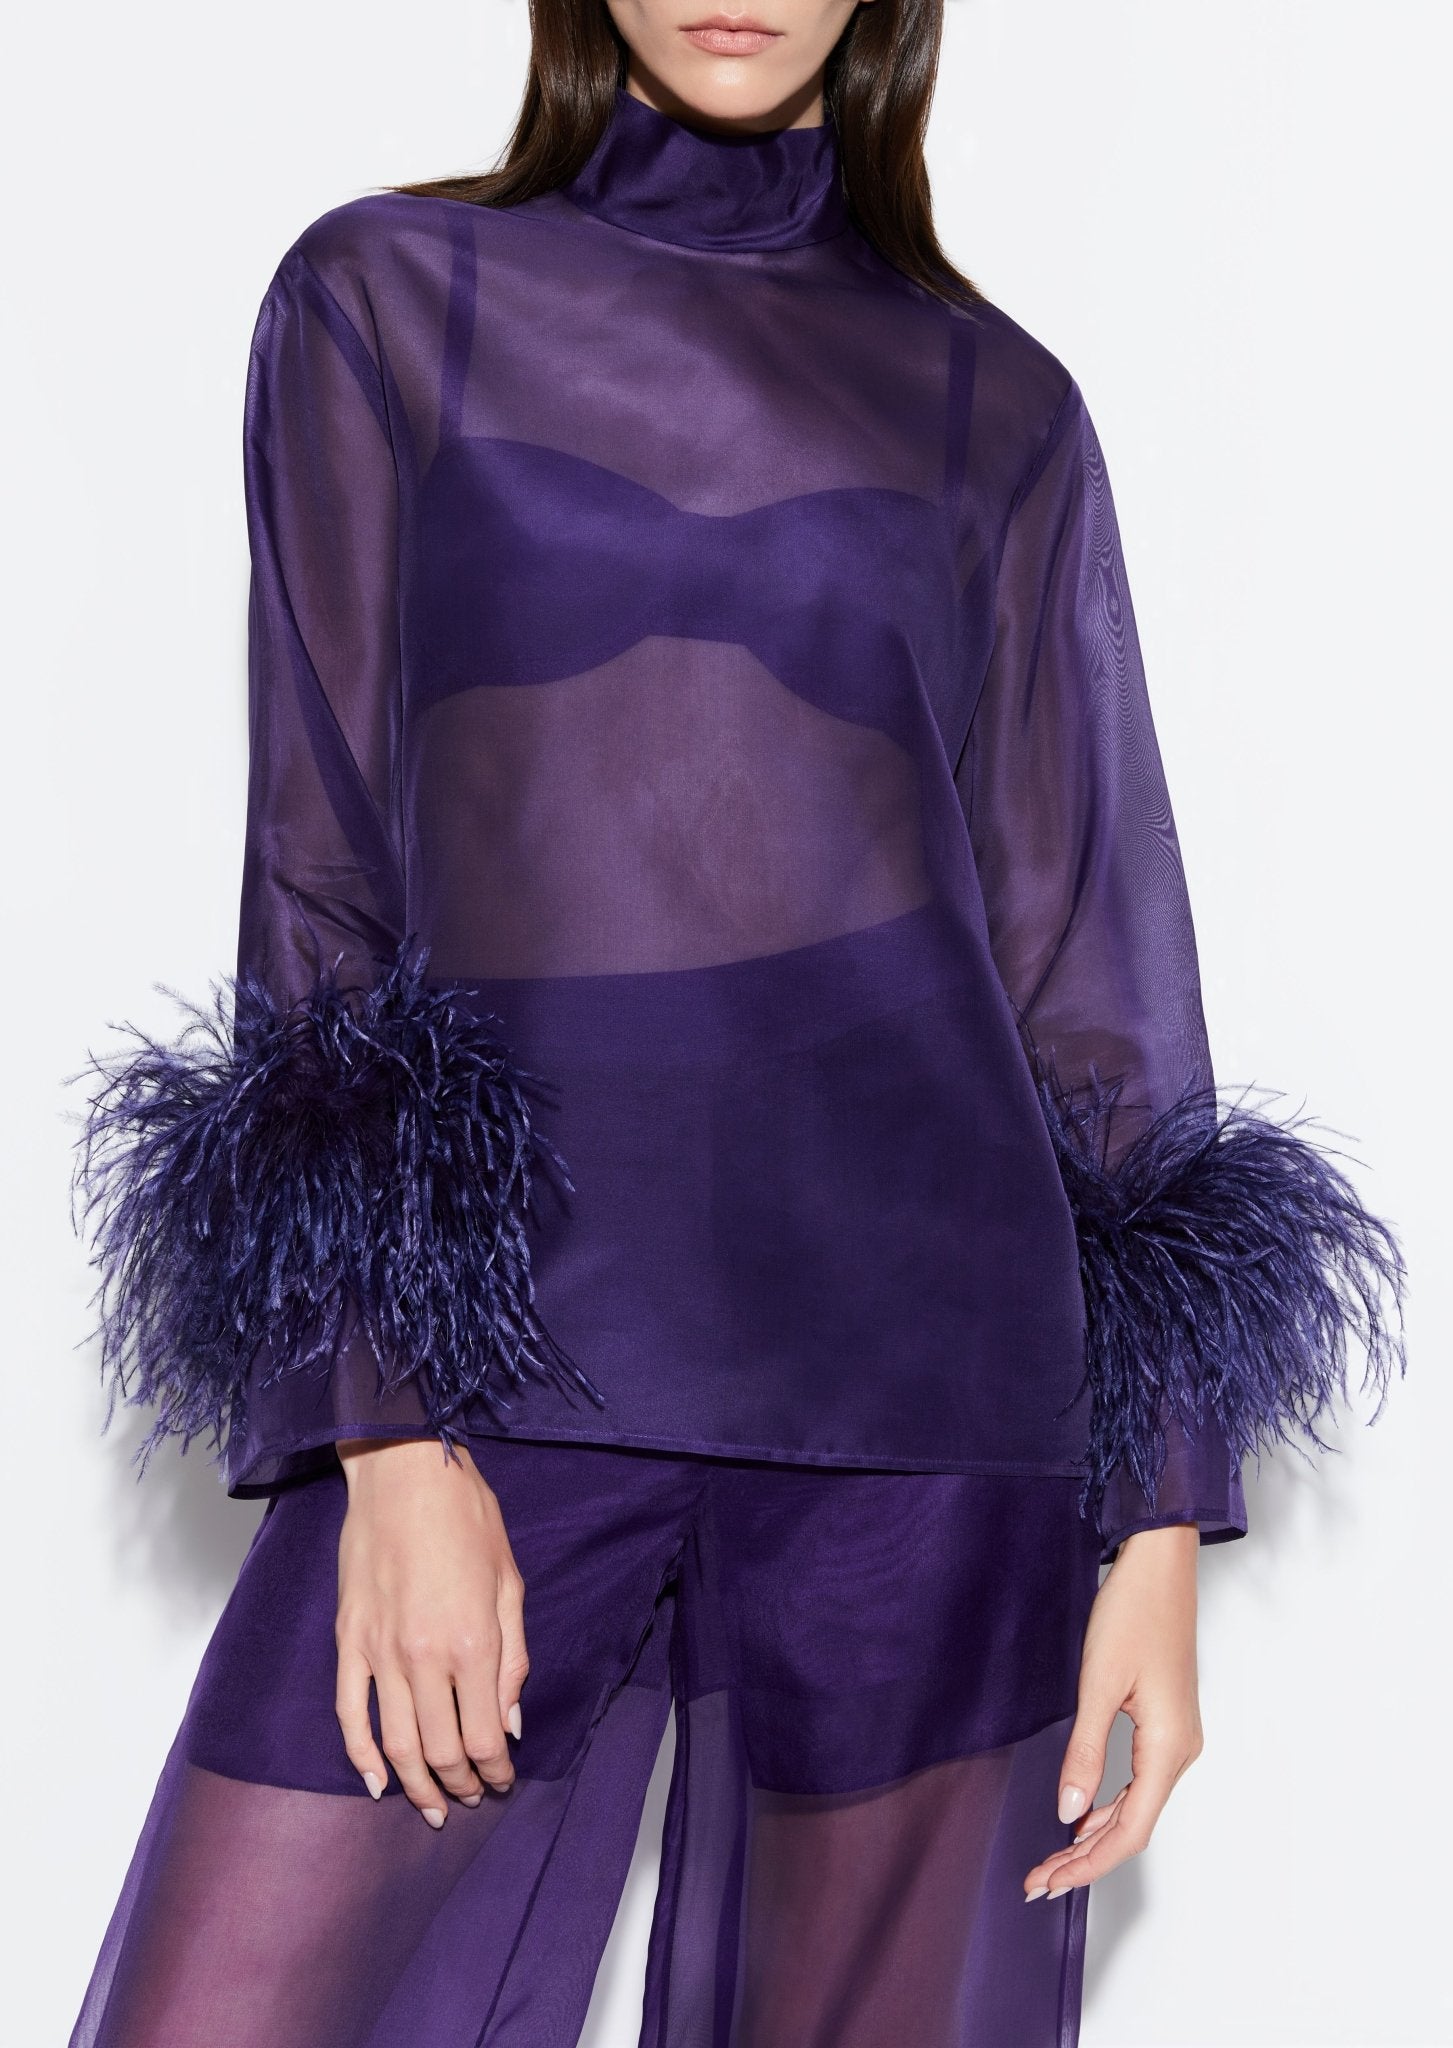 Organza Top With Feathers - LAPOINTE